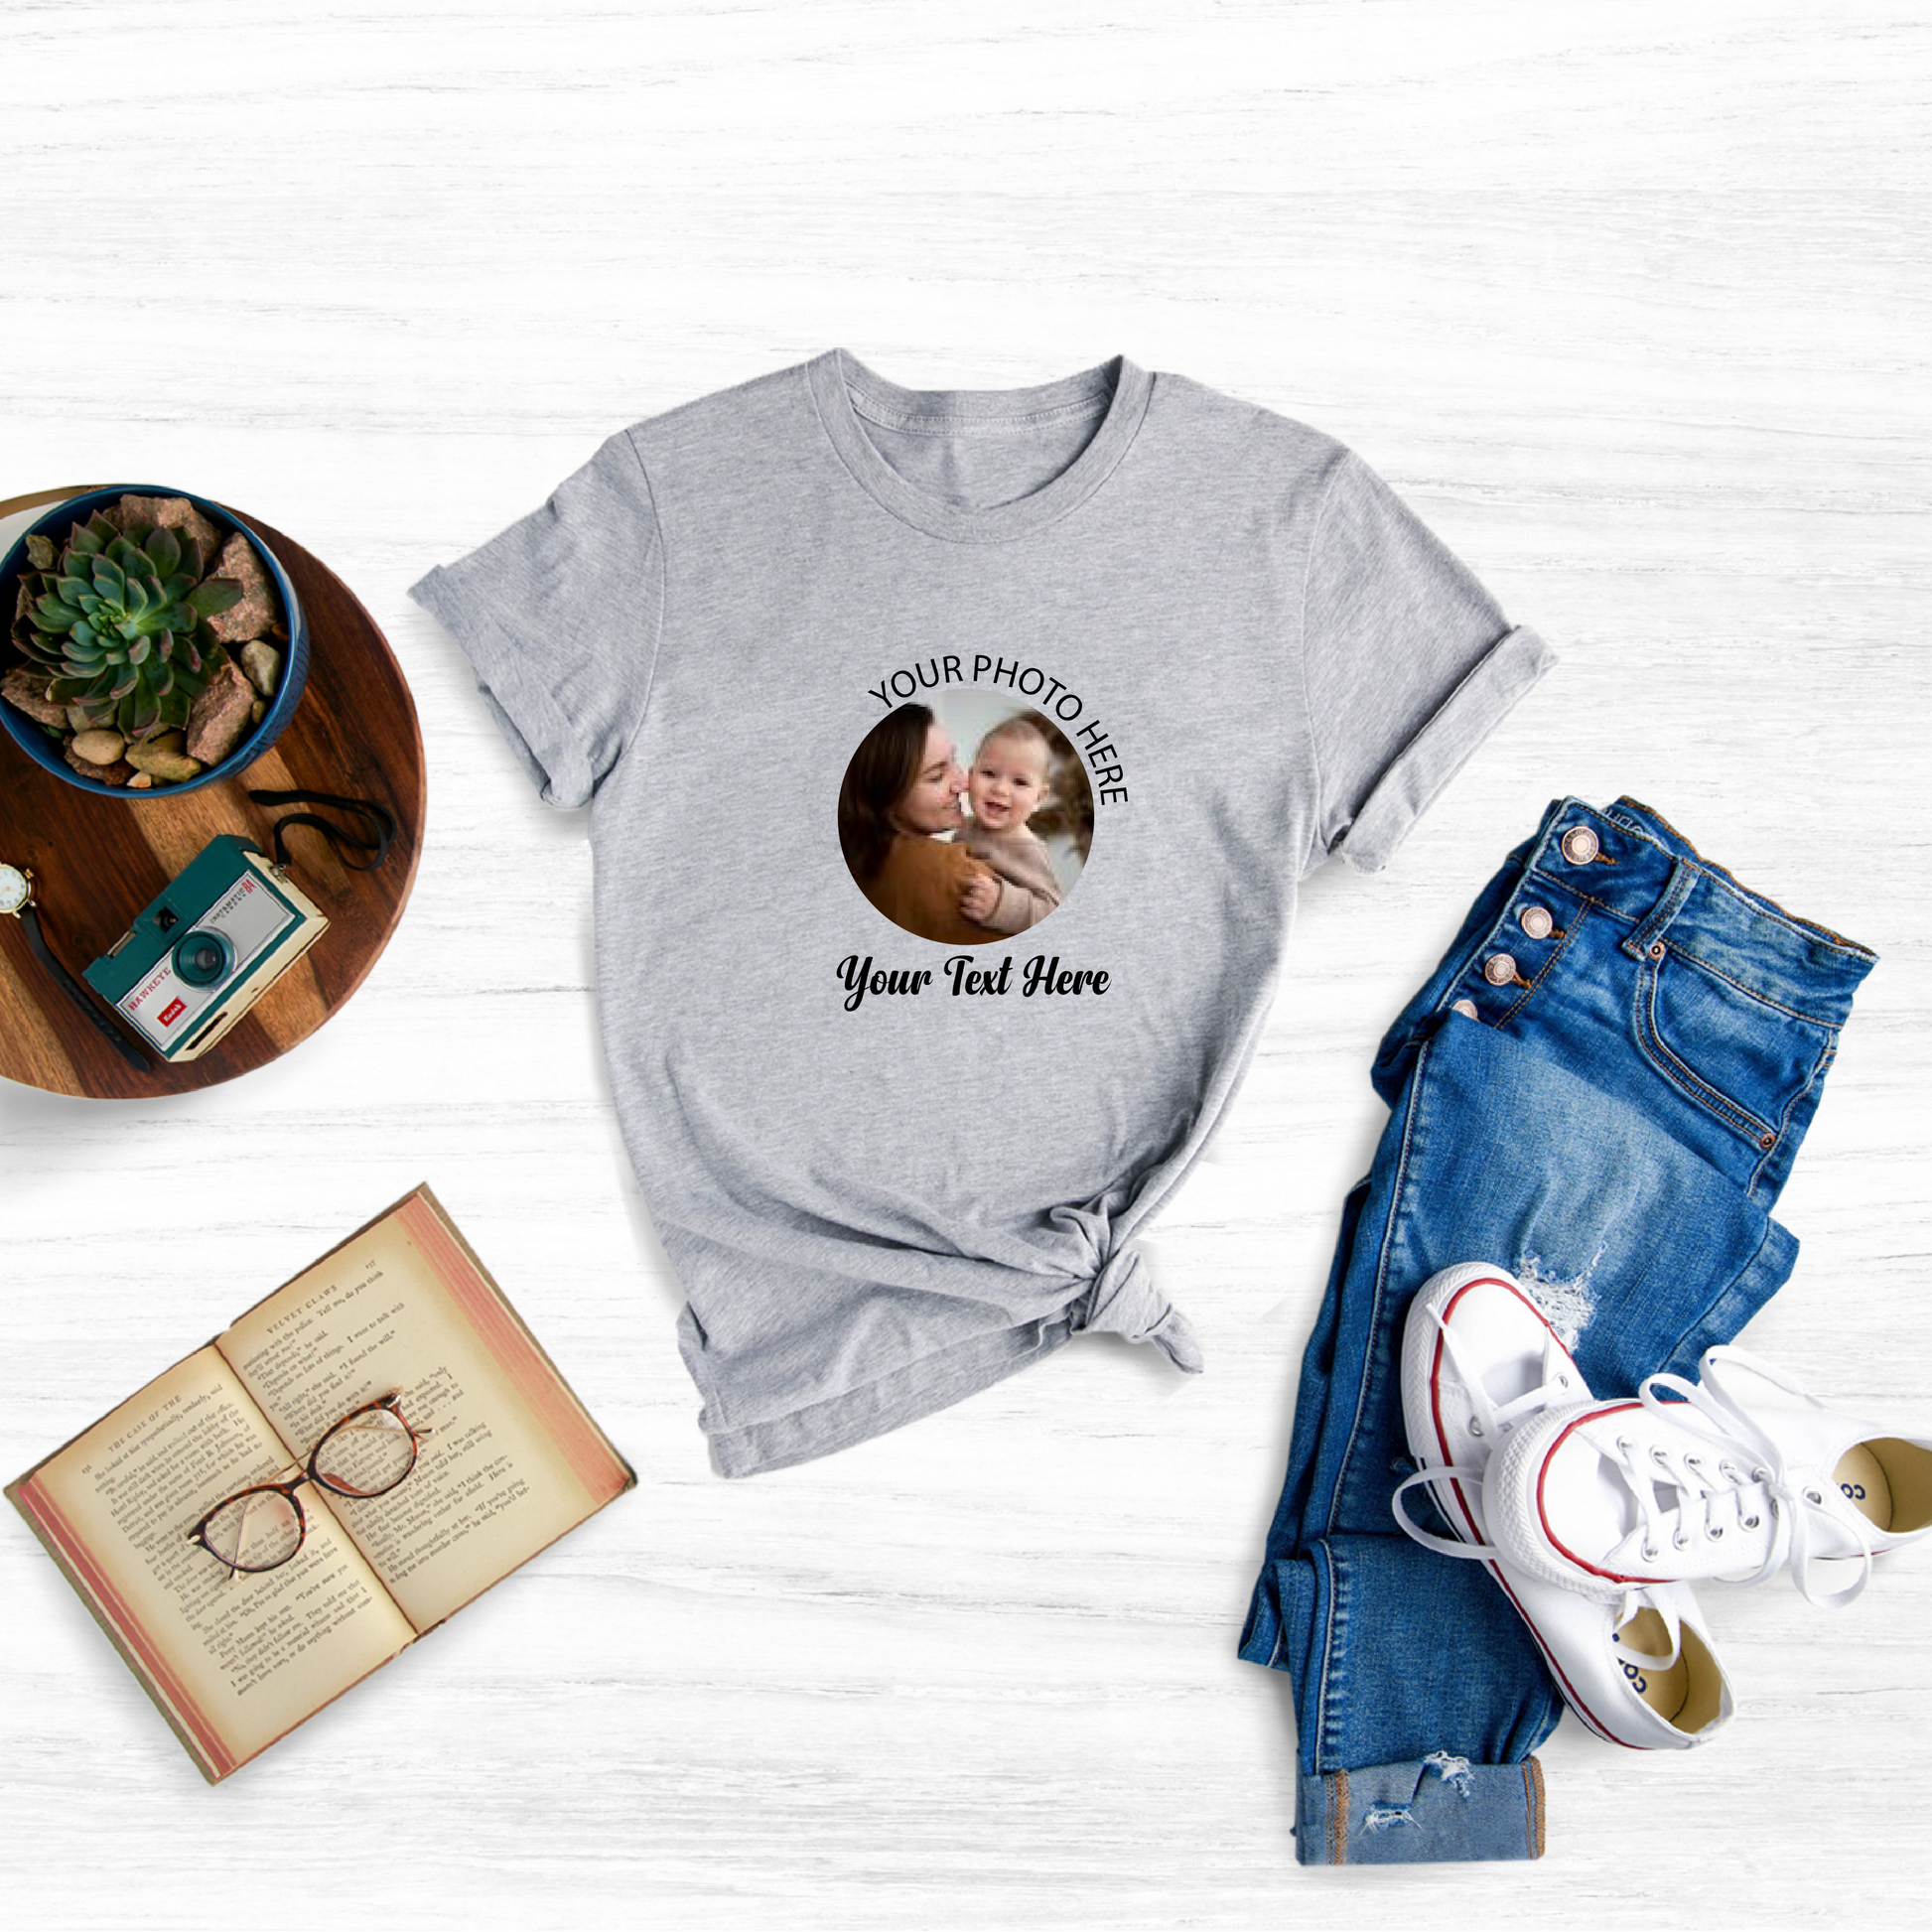 Personalized Photo Baby Bodysuit: Capture precious moments with this custom-made onesie